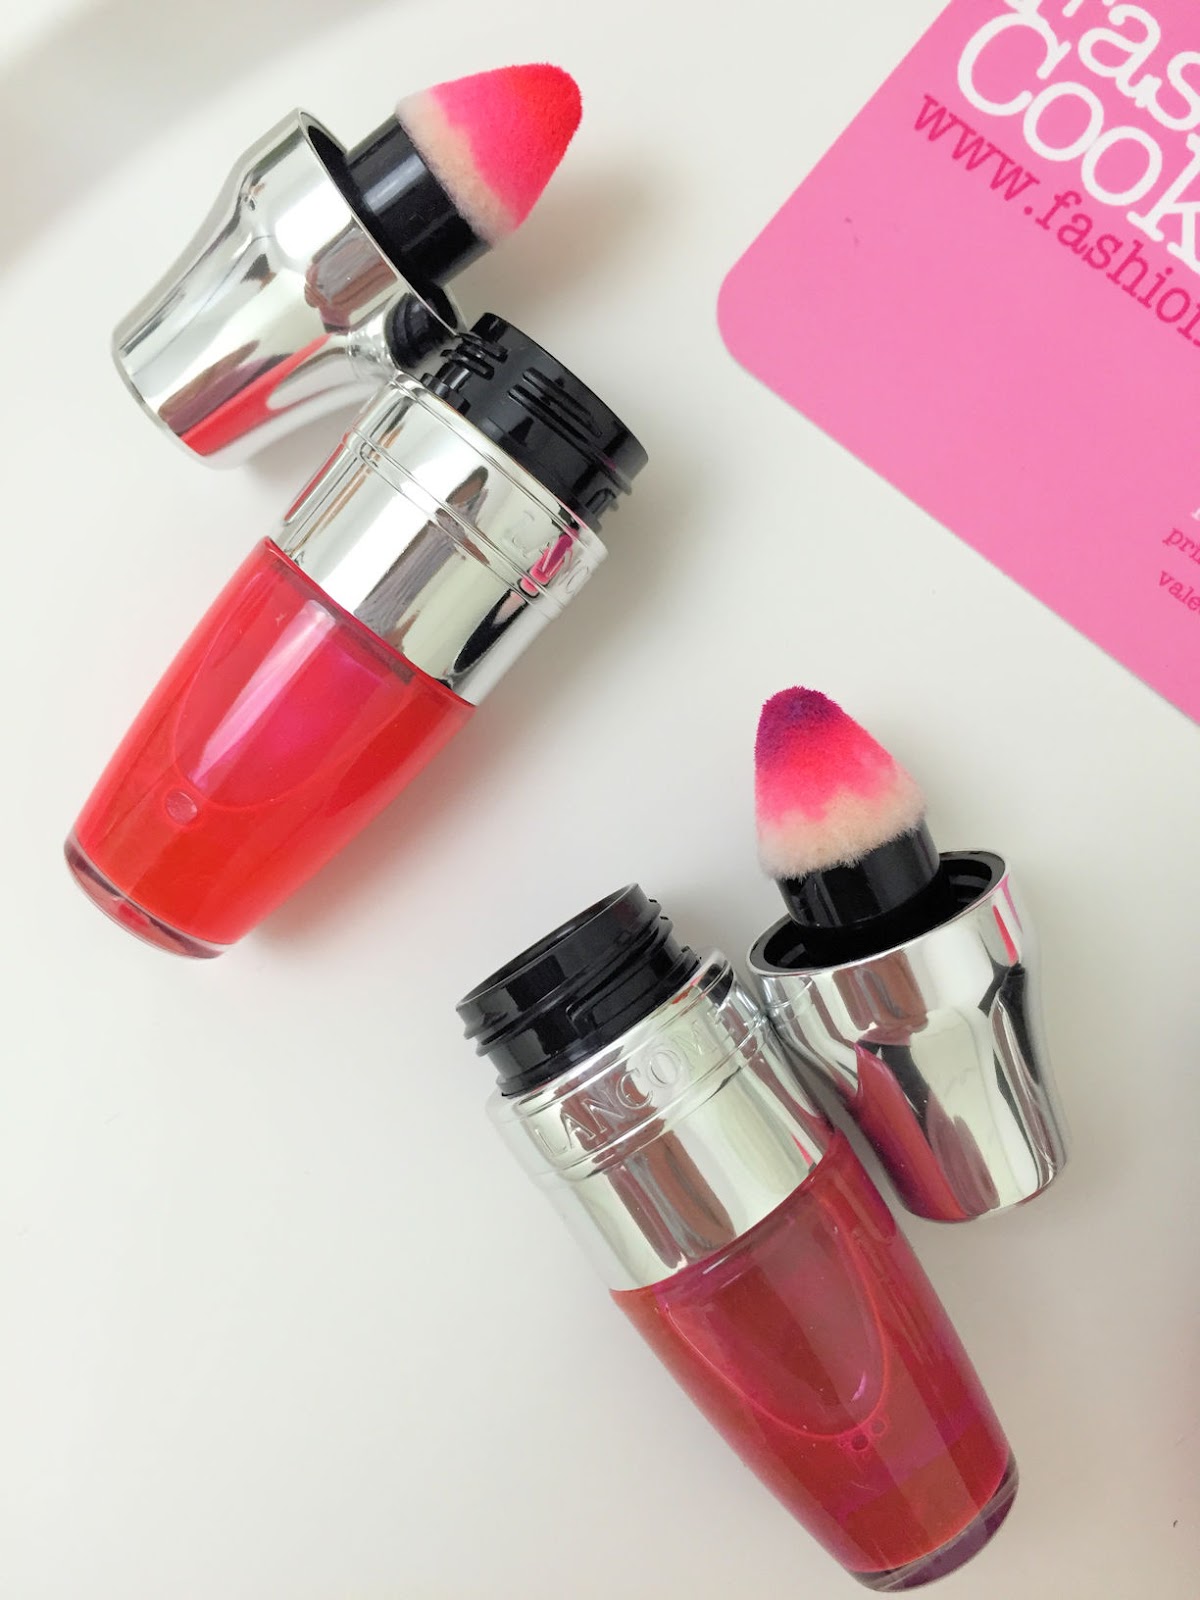 Lancome Juicy Shakers review on Fashion and Cookies beauty blog, beauty blogger